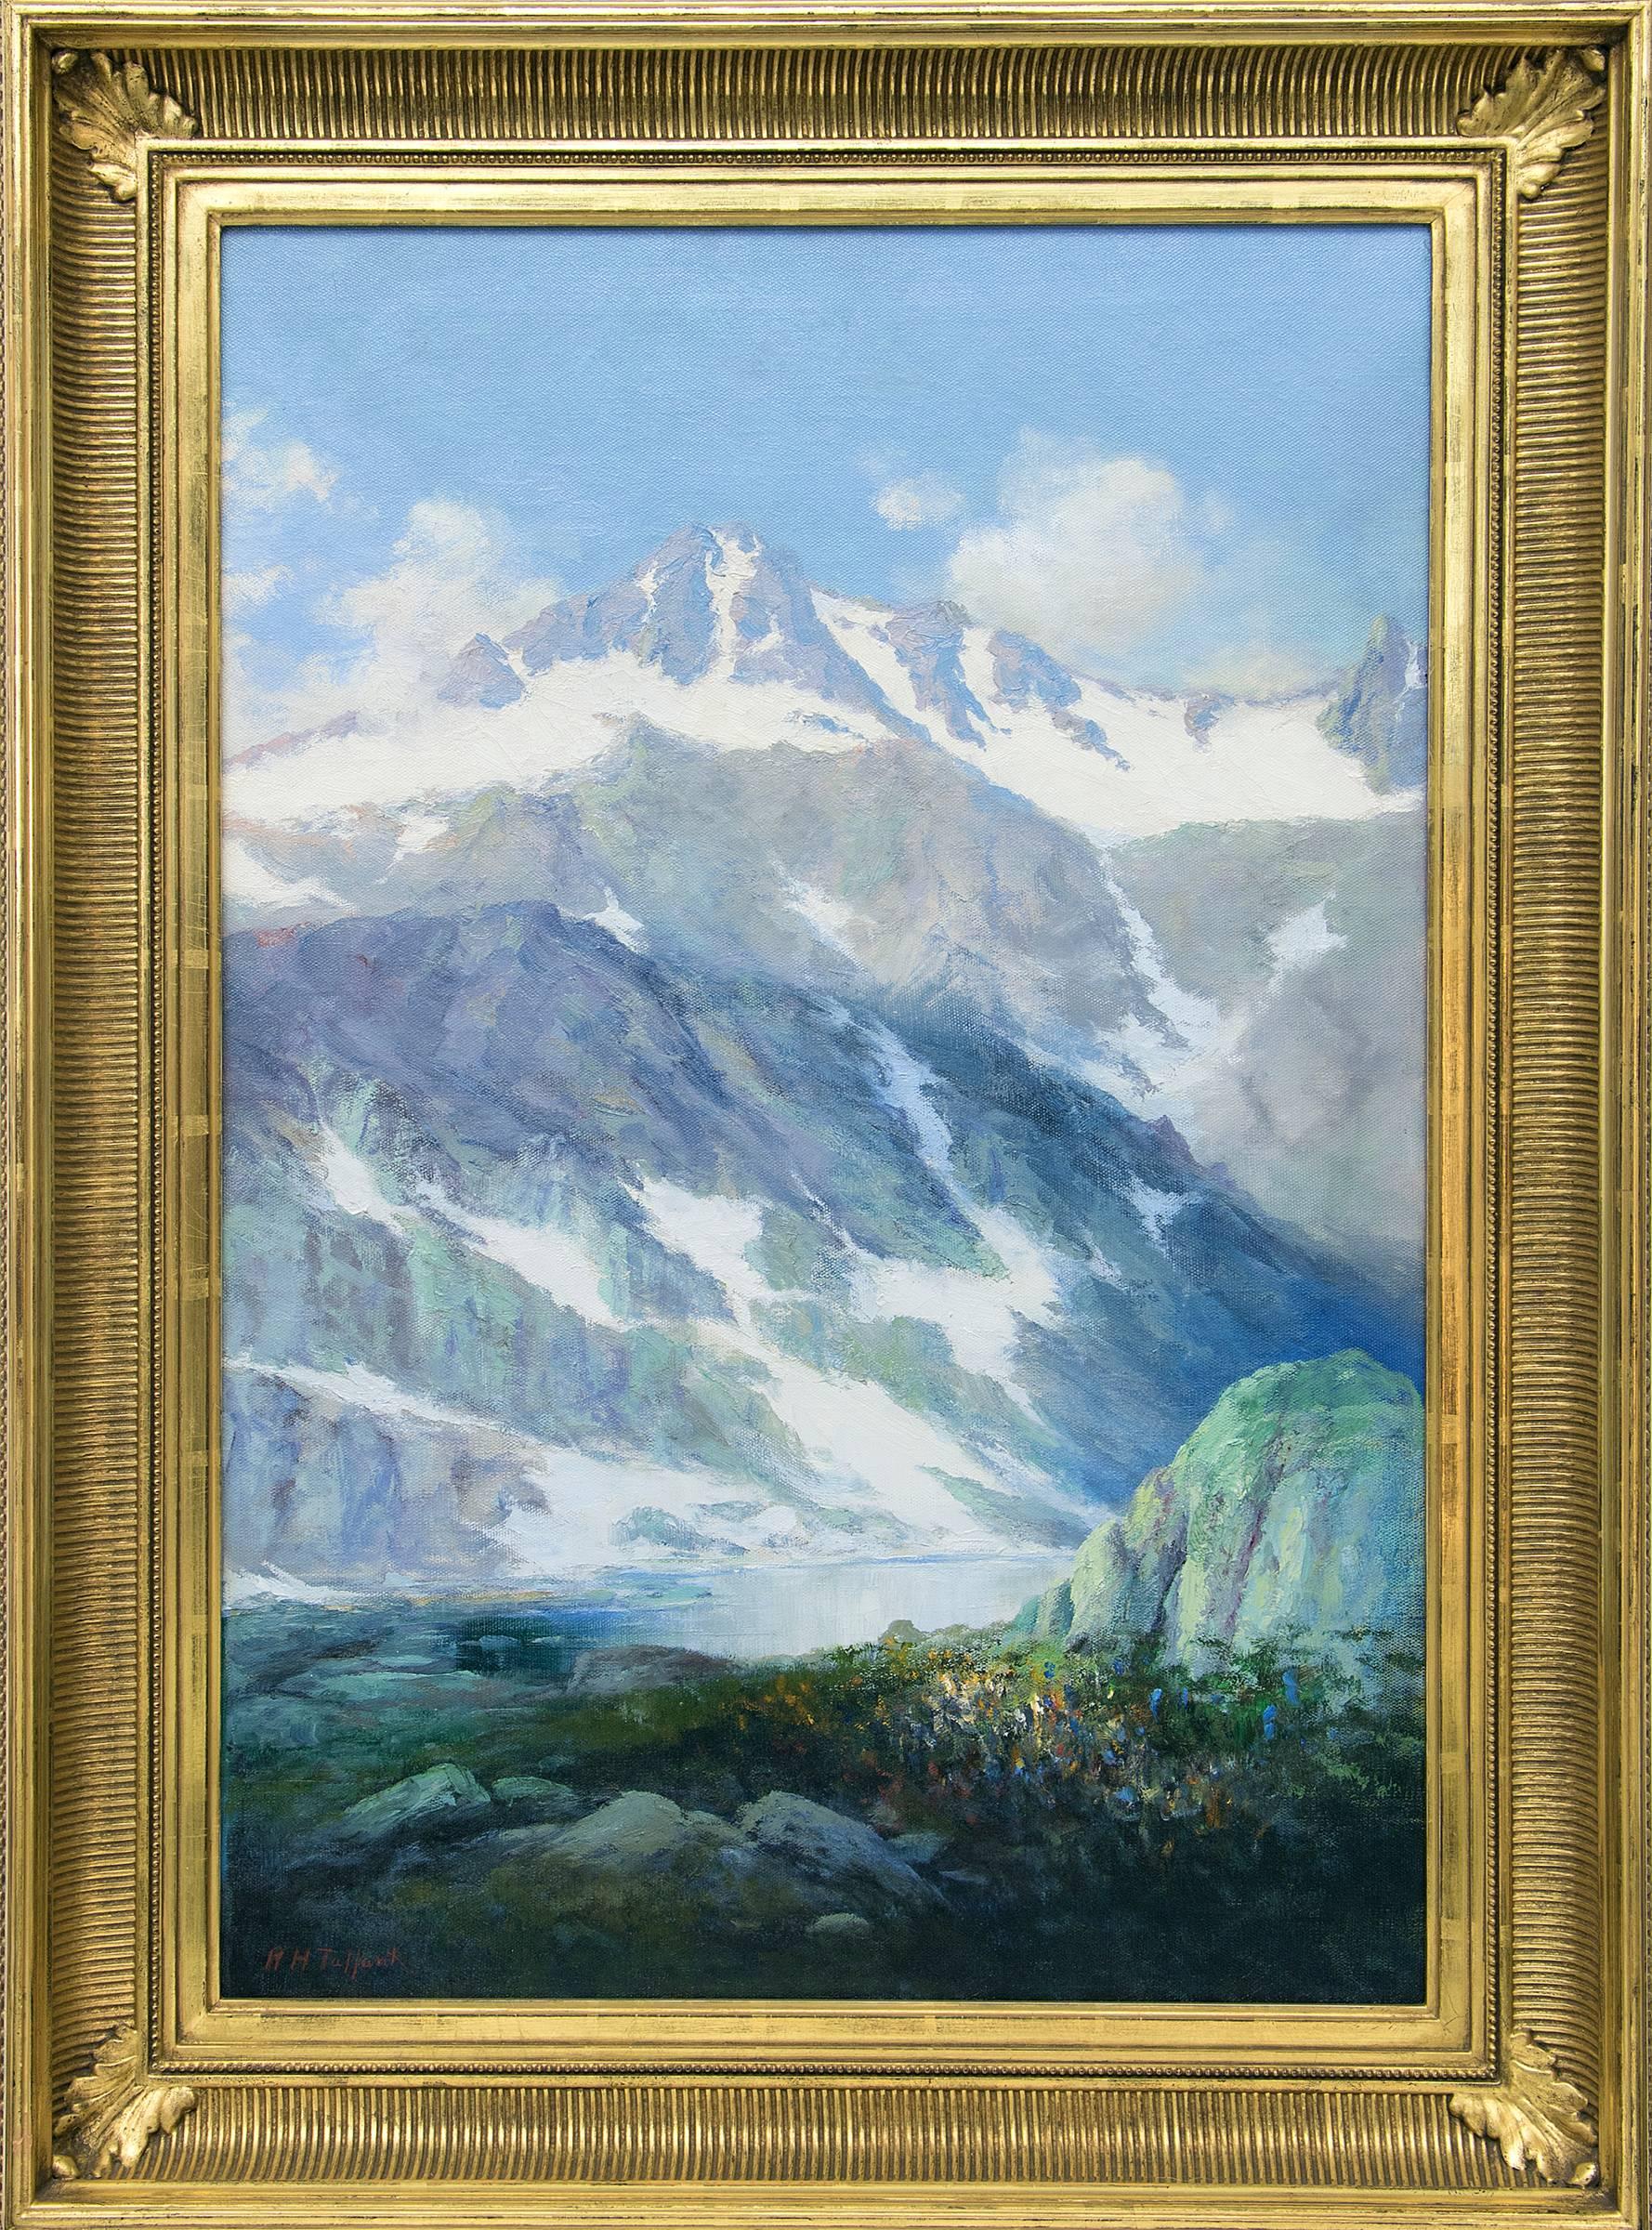 Richard H. Tallant Landscape Painting - The Heart of the Rocky Mountain National Park (Mount Ida)